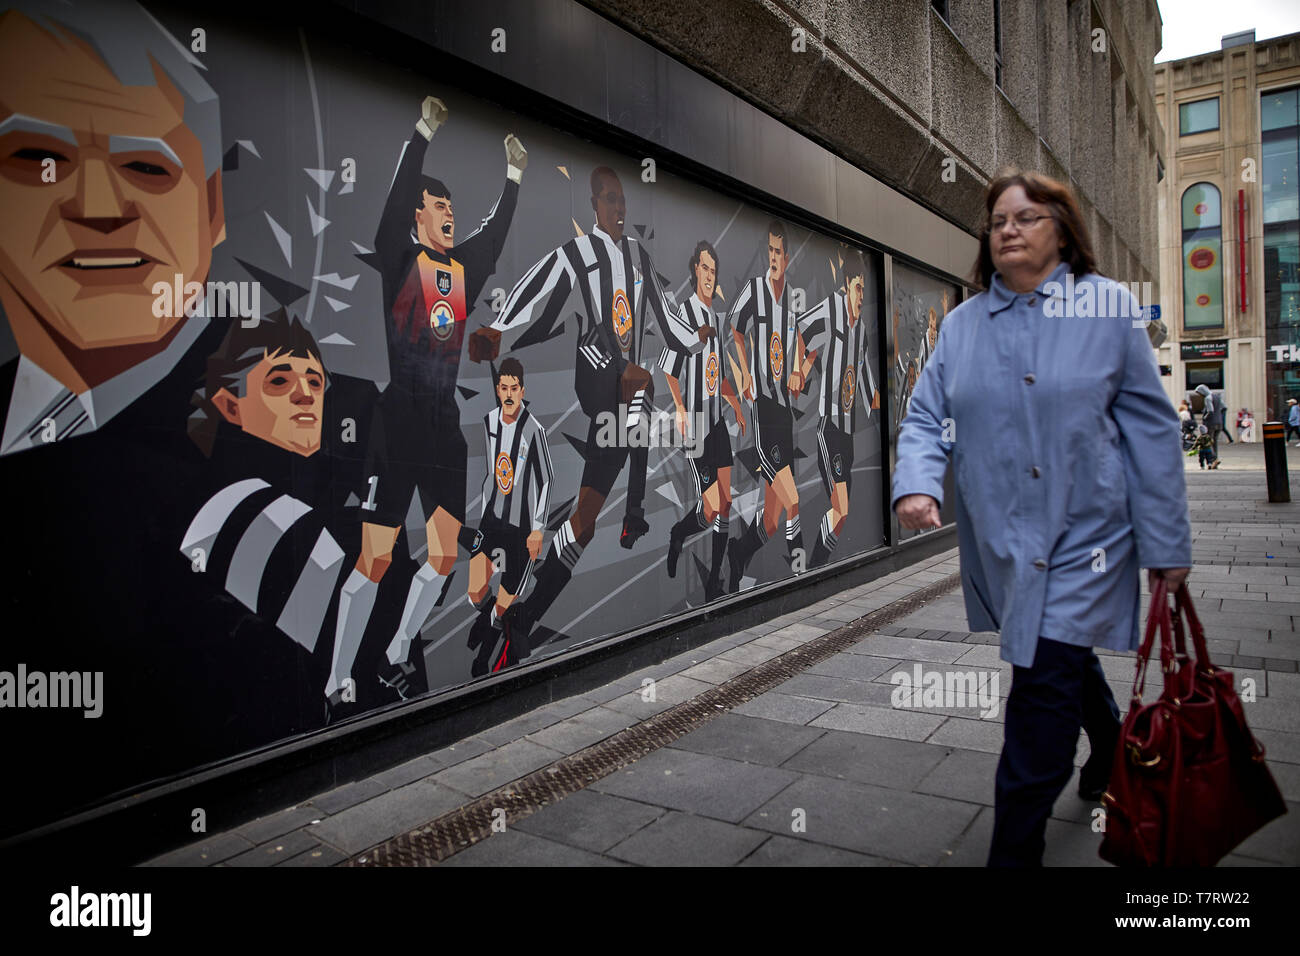 Newcastle upon Tyne, Scott's Menswear in Newcastle City Centre mural honours Toon legends ... Newcastle United mural Stock Photo